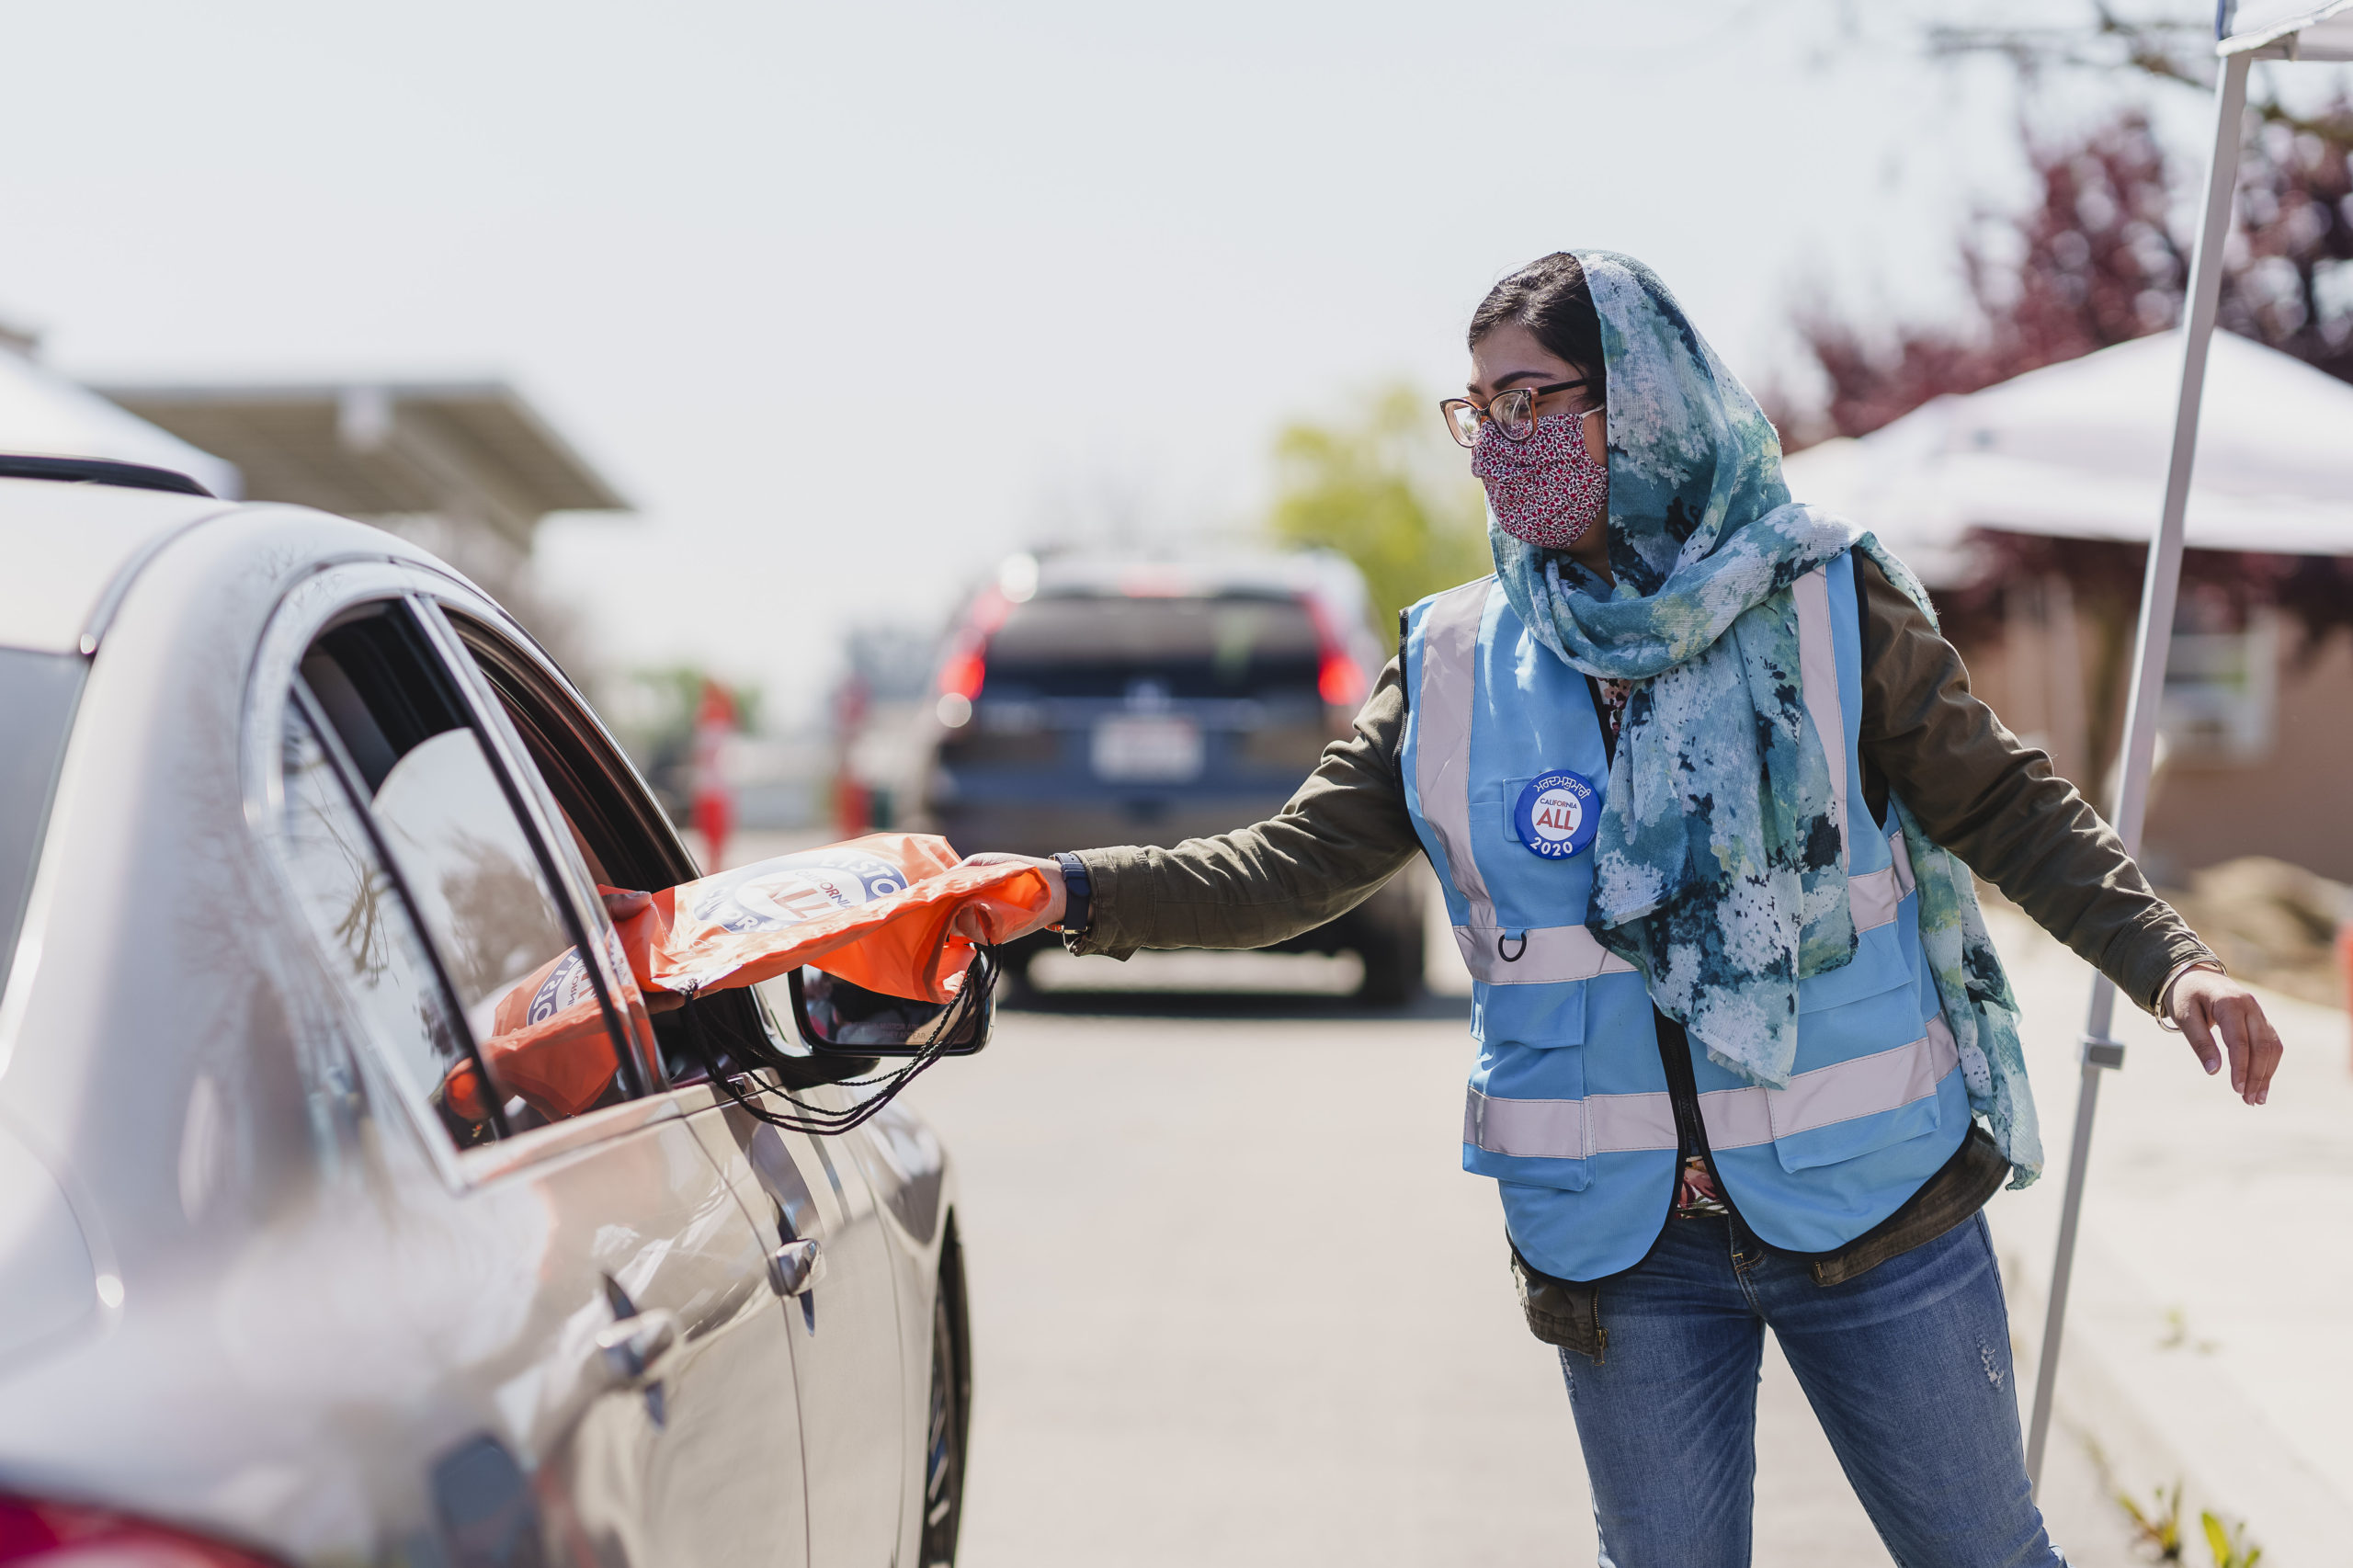 A volunteer gives a support package to someone in a car at an outdoor event.